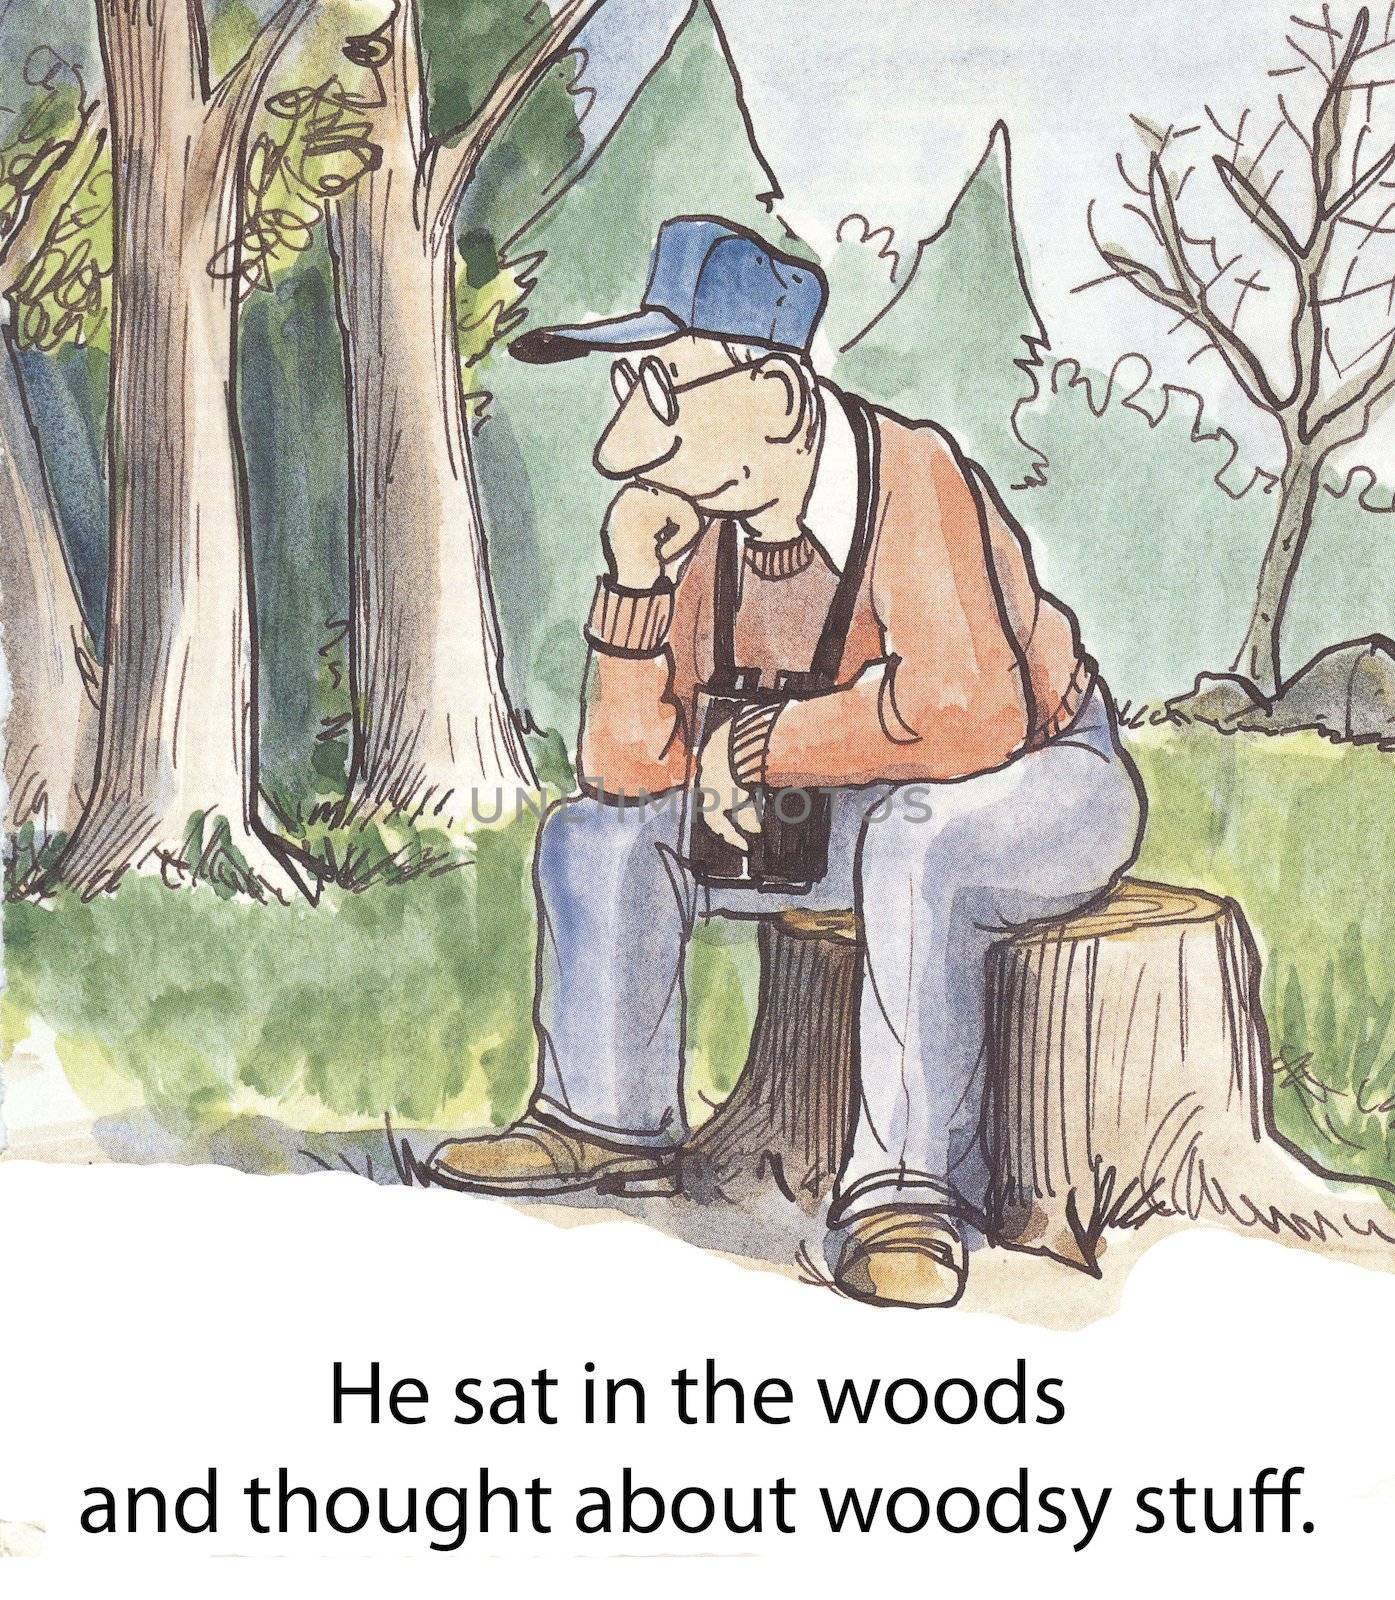 He sat in the woods and thought about woodsy stuff.